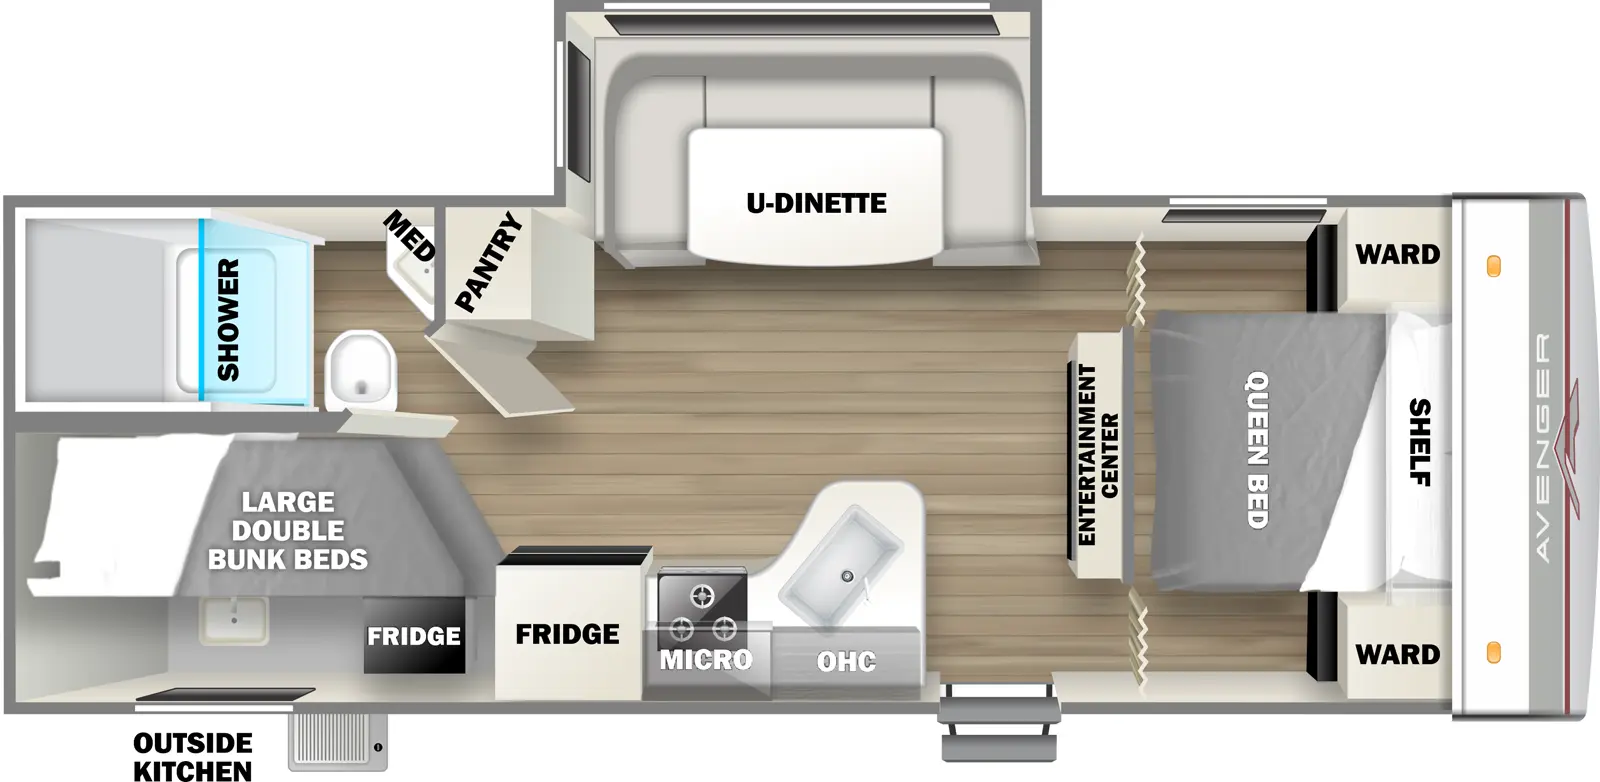 The 24BHSLE has one slideout and one entry. Exterior features an outside kitchen. Interior layout front to back: foot facing queen bed with shelf above and wardrobes on each side; entertainment center on inner wall with doors to bedroom on each side; off-door side slideout with u-dinette; door side entry, peninsula kitchen counter with sink, overhead cabinet, microwave, cooktop and refrigerator; pantry along inner wall on off-door side; rear door side double bunk beds; rear off-door side full bathroom with medicine cabinet.